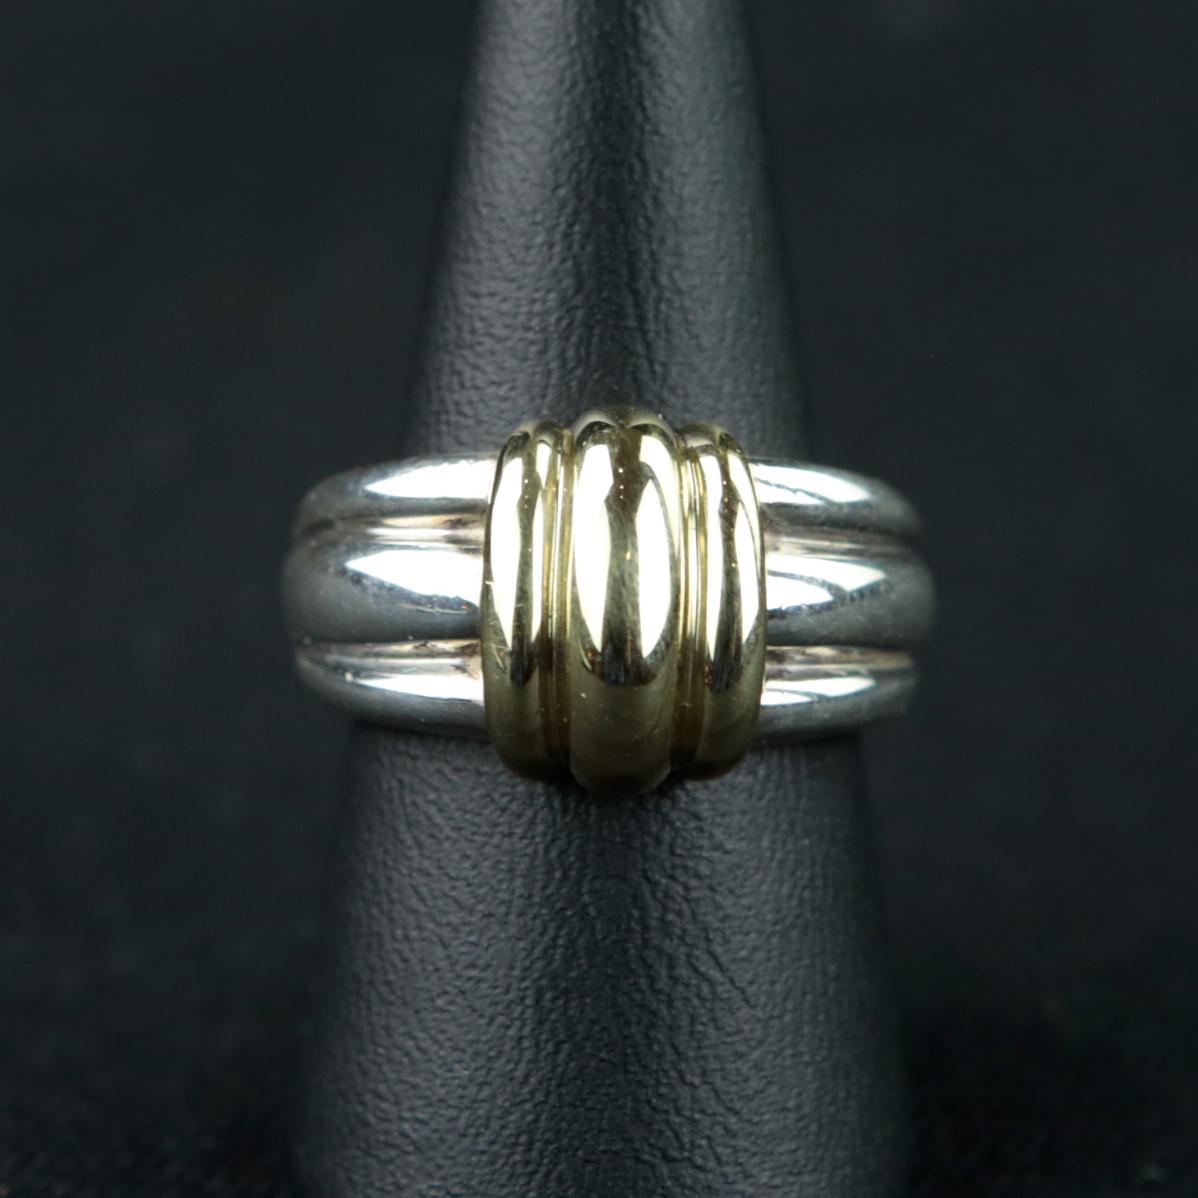 A ring from Tiffany & Co. made of 925/- sterling silver and 18 ct. yellow gold that is as special as it is designed for everyday wear. The yellow gold element is wrapped around the sterling silver ring band like a gathered band. The ring dates from